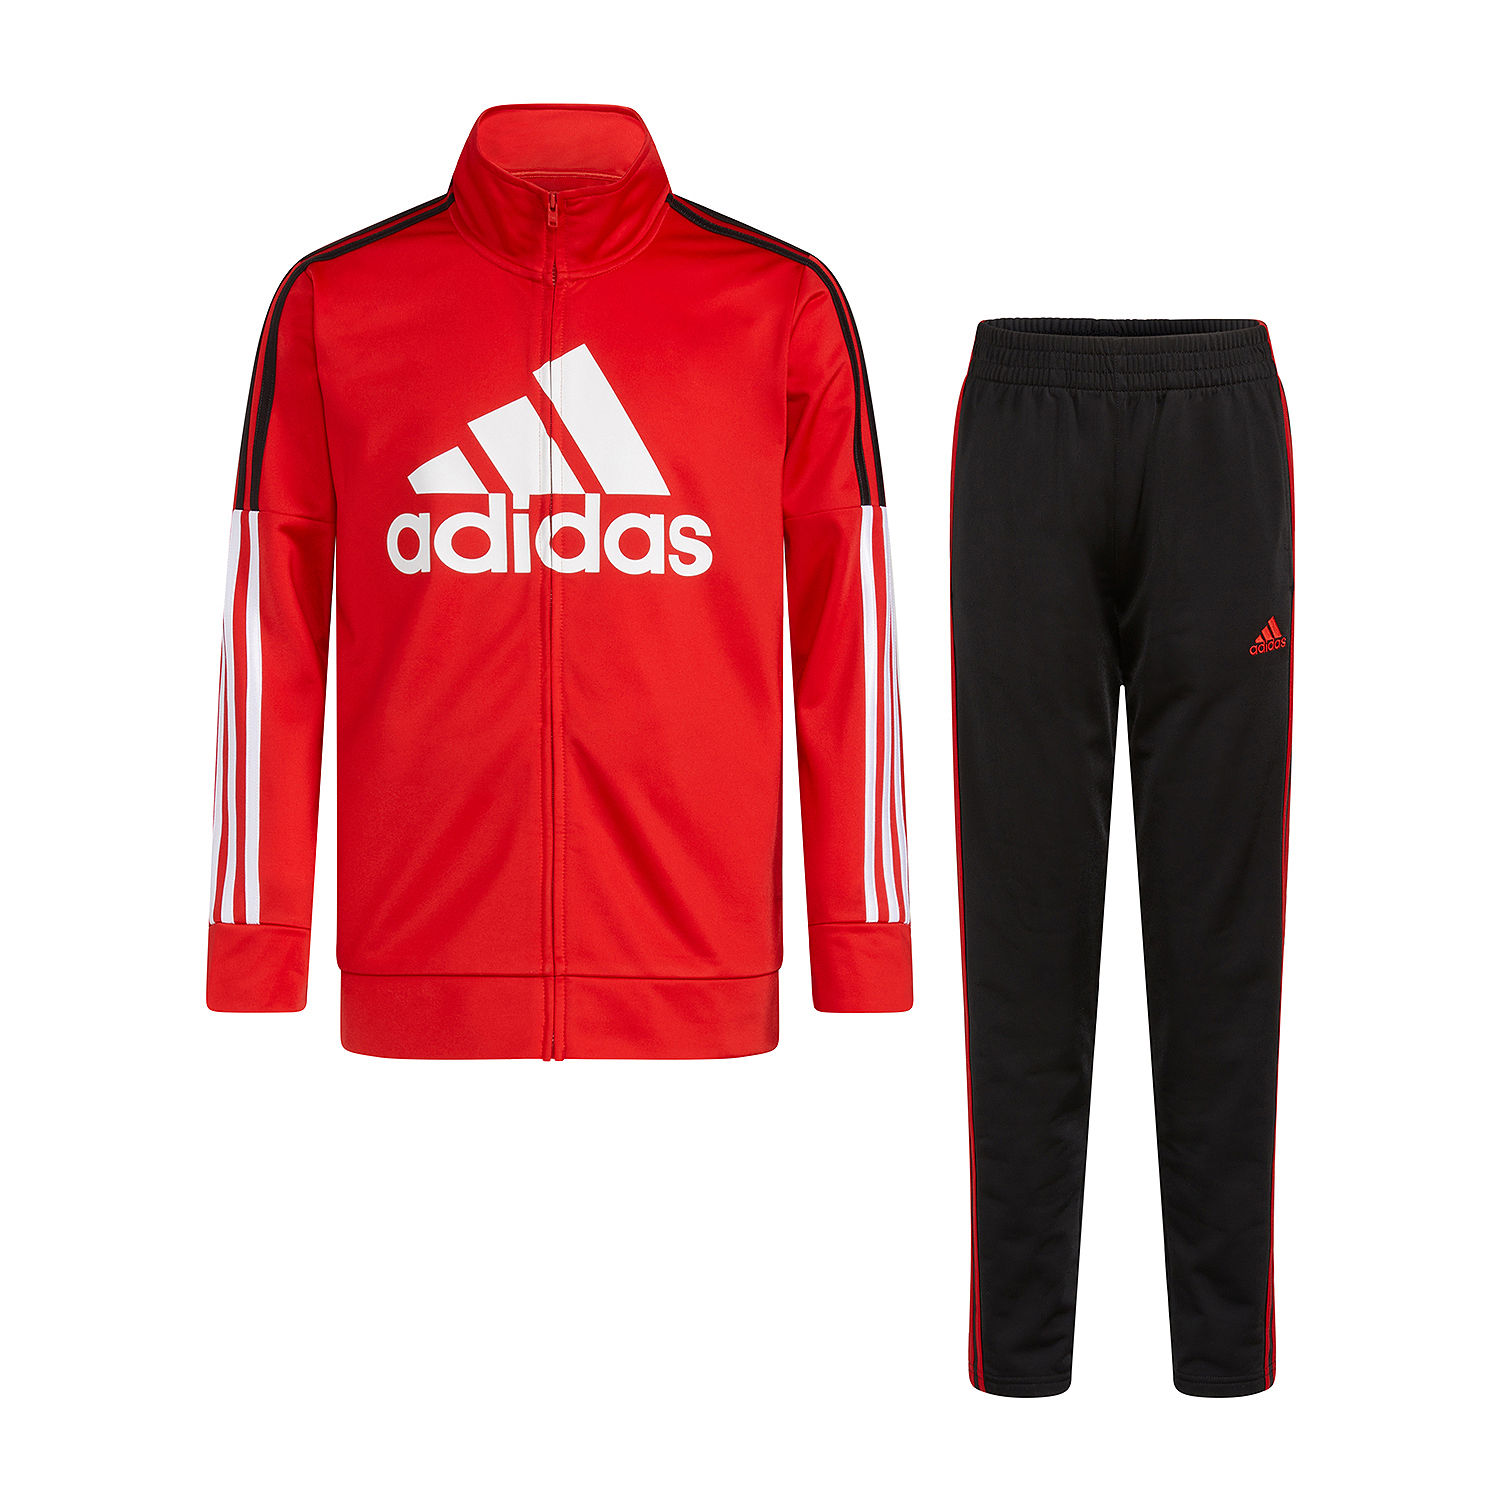 adidas Big Boys 2-pc. Track Suit - JCPenney